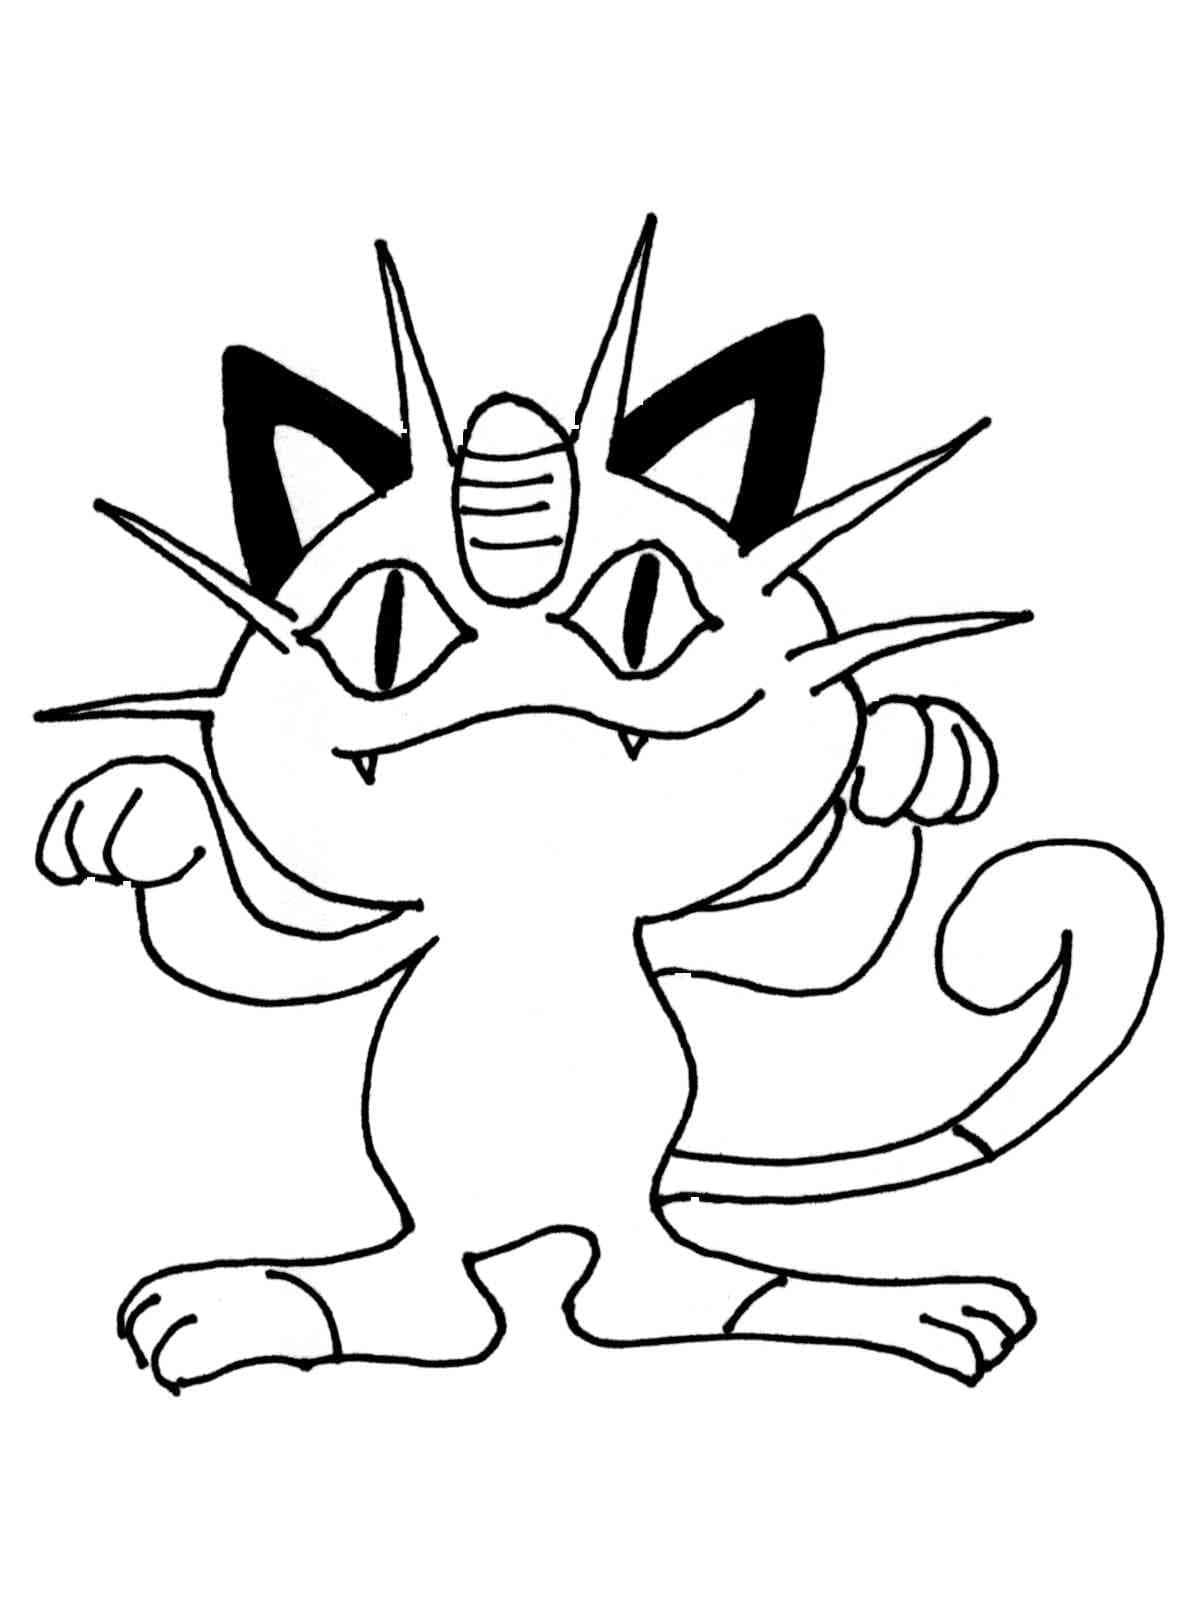 Smiling Meowth coloring page - Download, Print or Color Online for Free